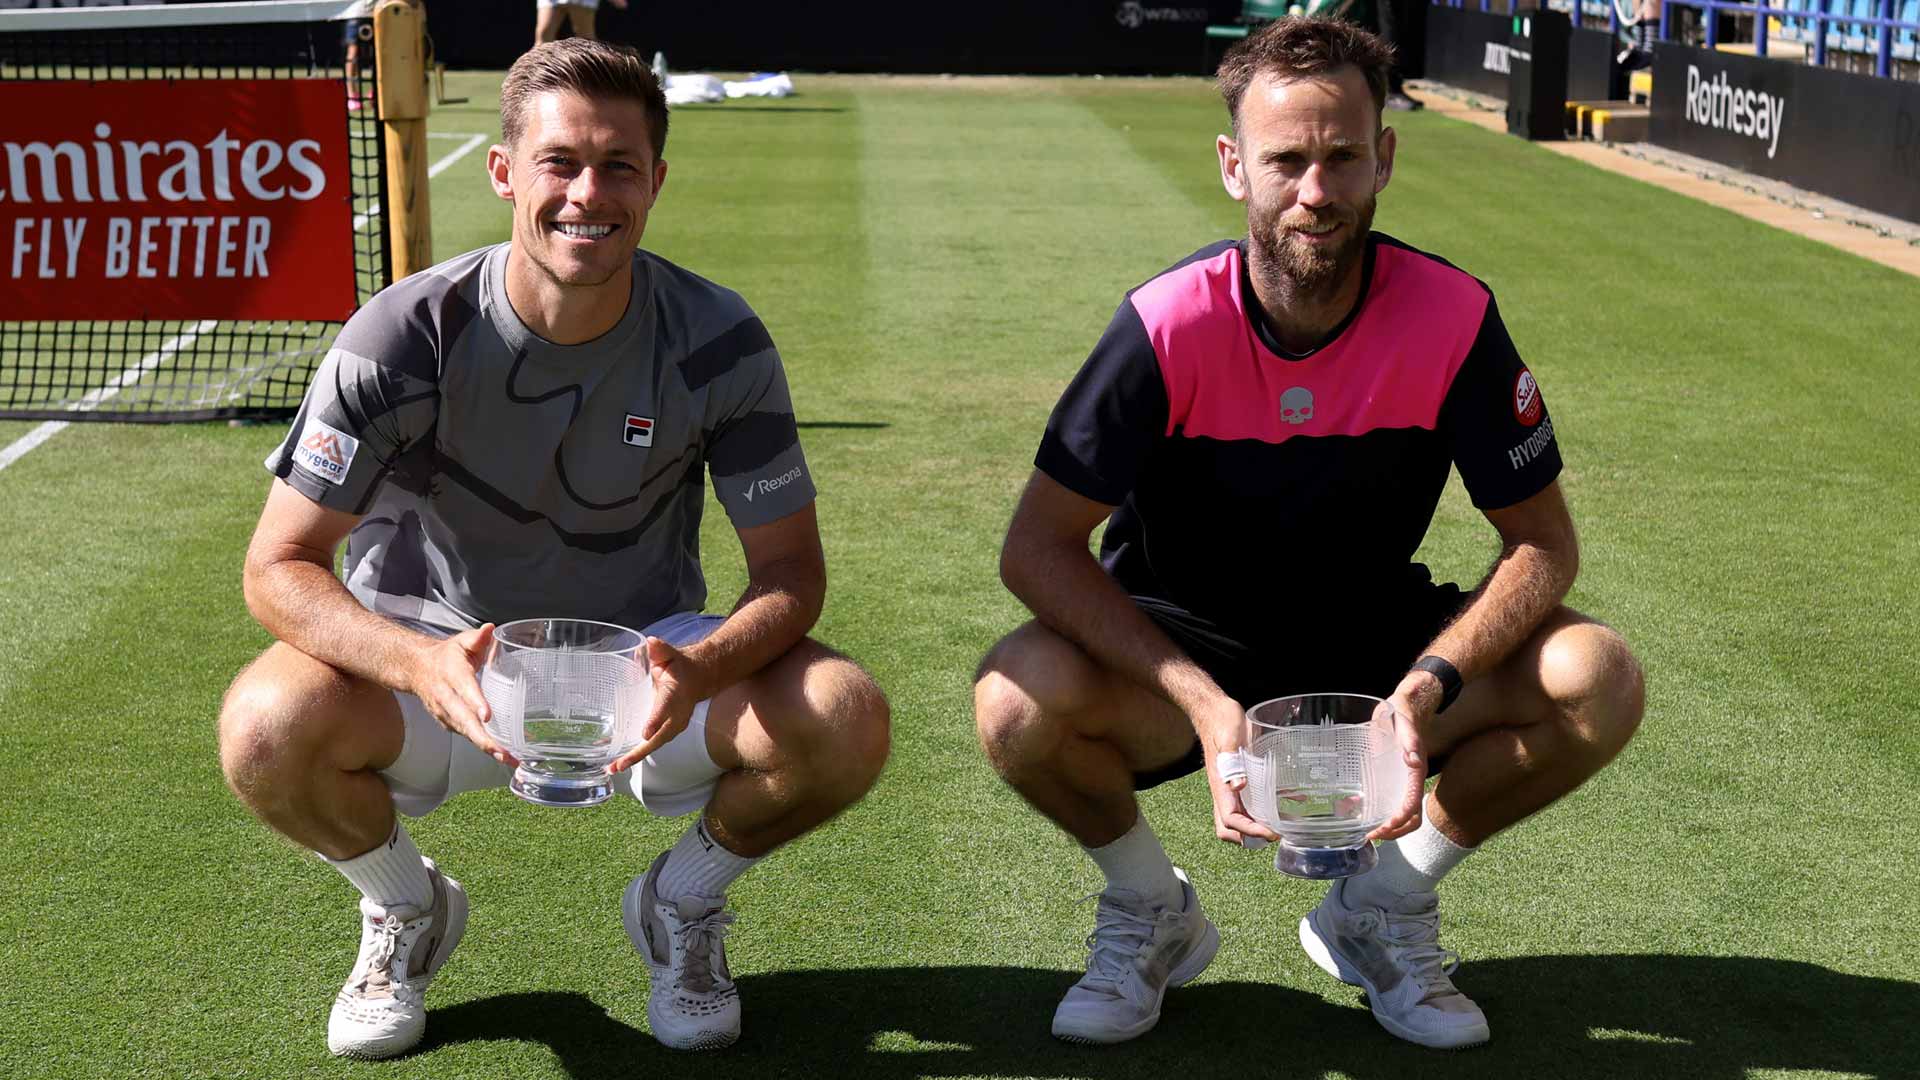 <a href='https://www.atptour.com/en/players/neal-skupski/sl22/overview'>Neal Skupski</a> and <a href='https://www.atptour.com/en/players/michael-venus/v576/overview'>Michael Venus</a> win the ATP 250 in Eastbourne.